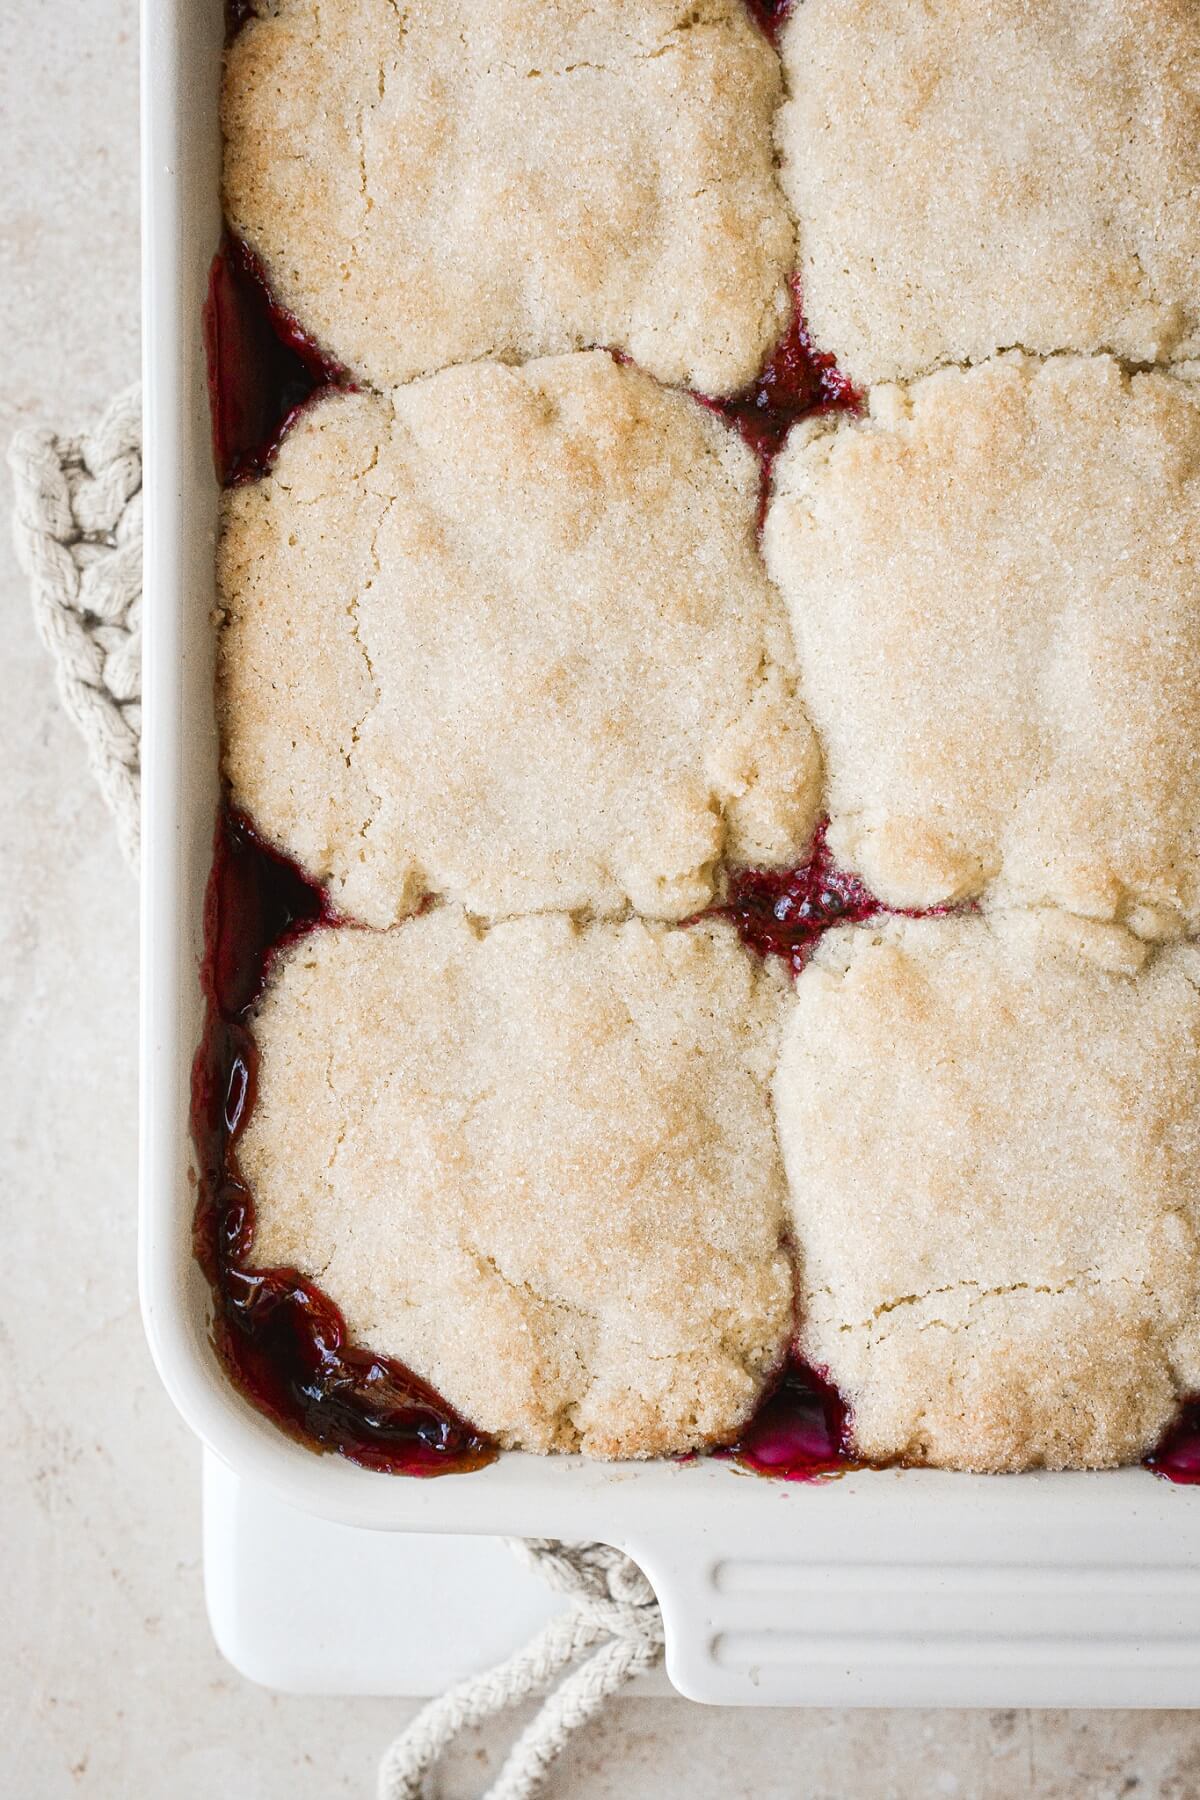 Just baked cherry cobbler with sugar cookie topping.